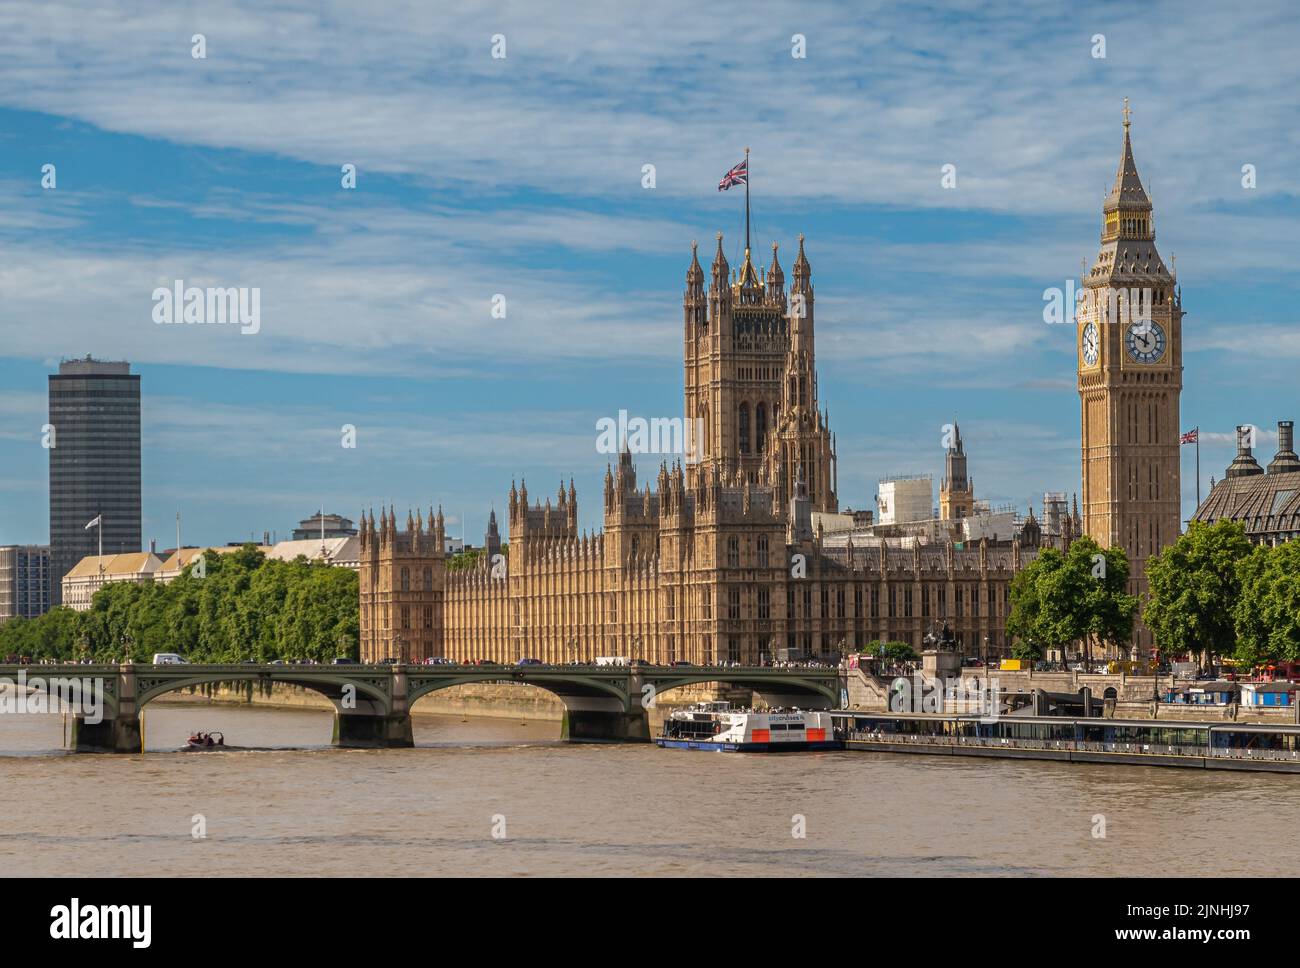 London, UK - July 4, 2022: Scenery with Palace of Westminster, House of Lords, Big Ben, church towers, and further city highrise under blue clludscape Stock Photo